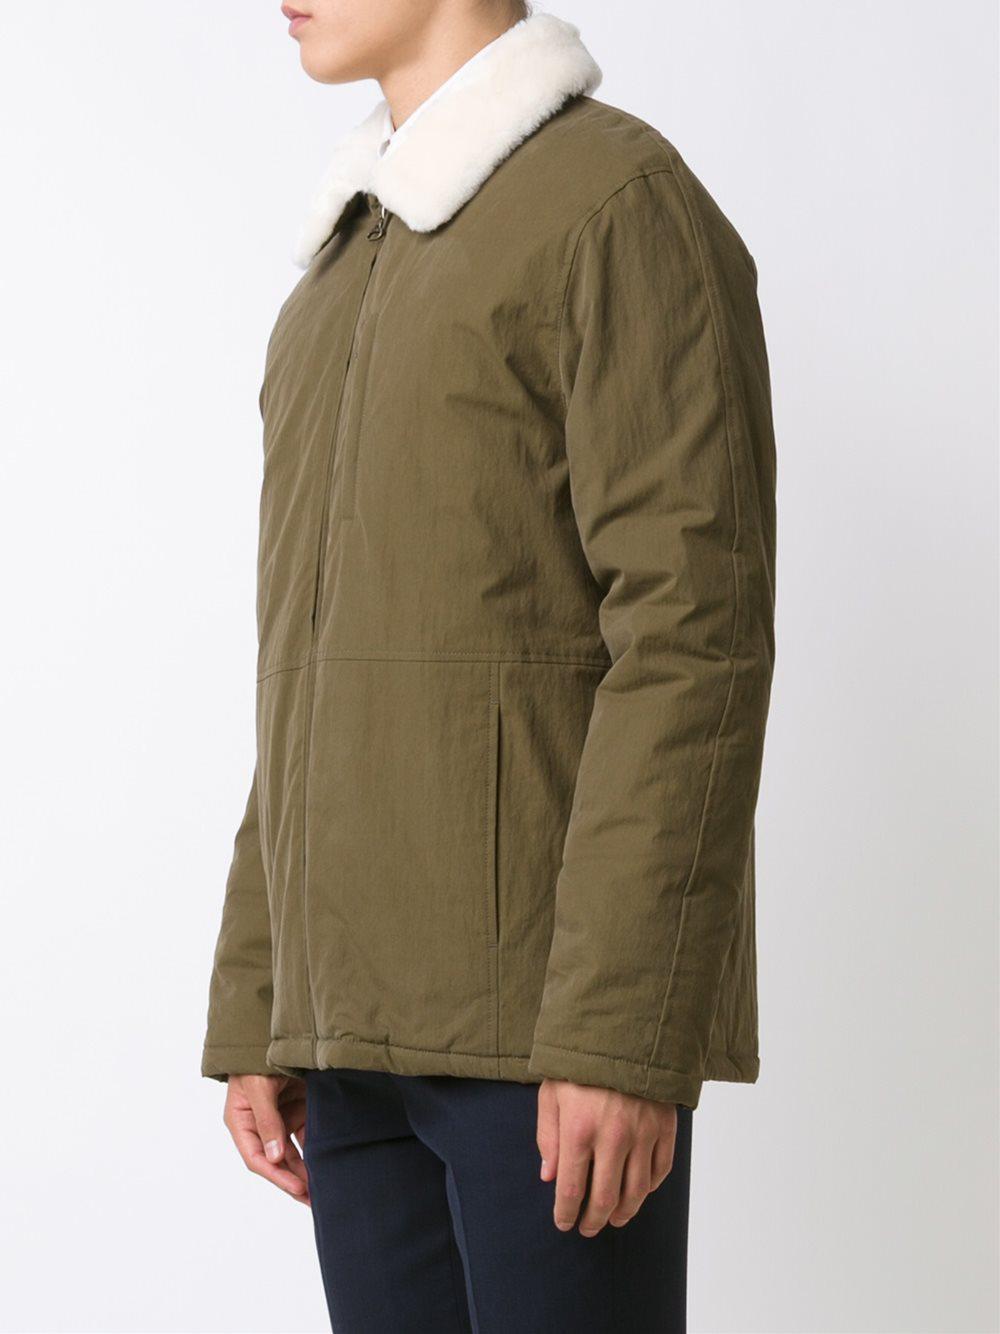 Lyst - A.P.C. Fur Collar Jacket in Green for Men